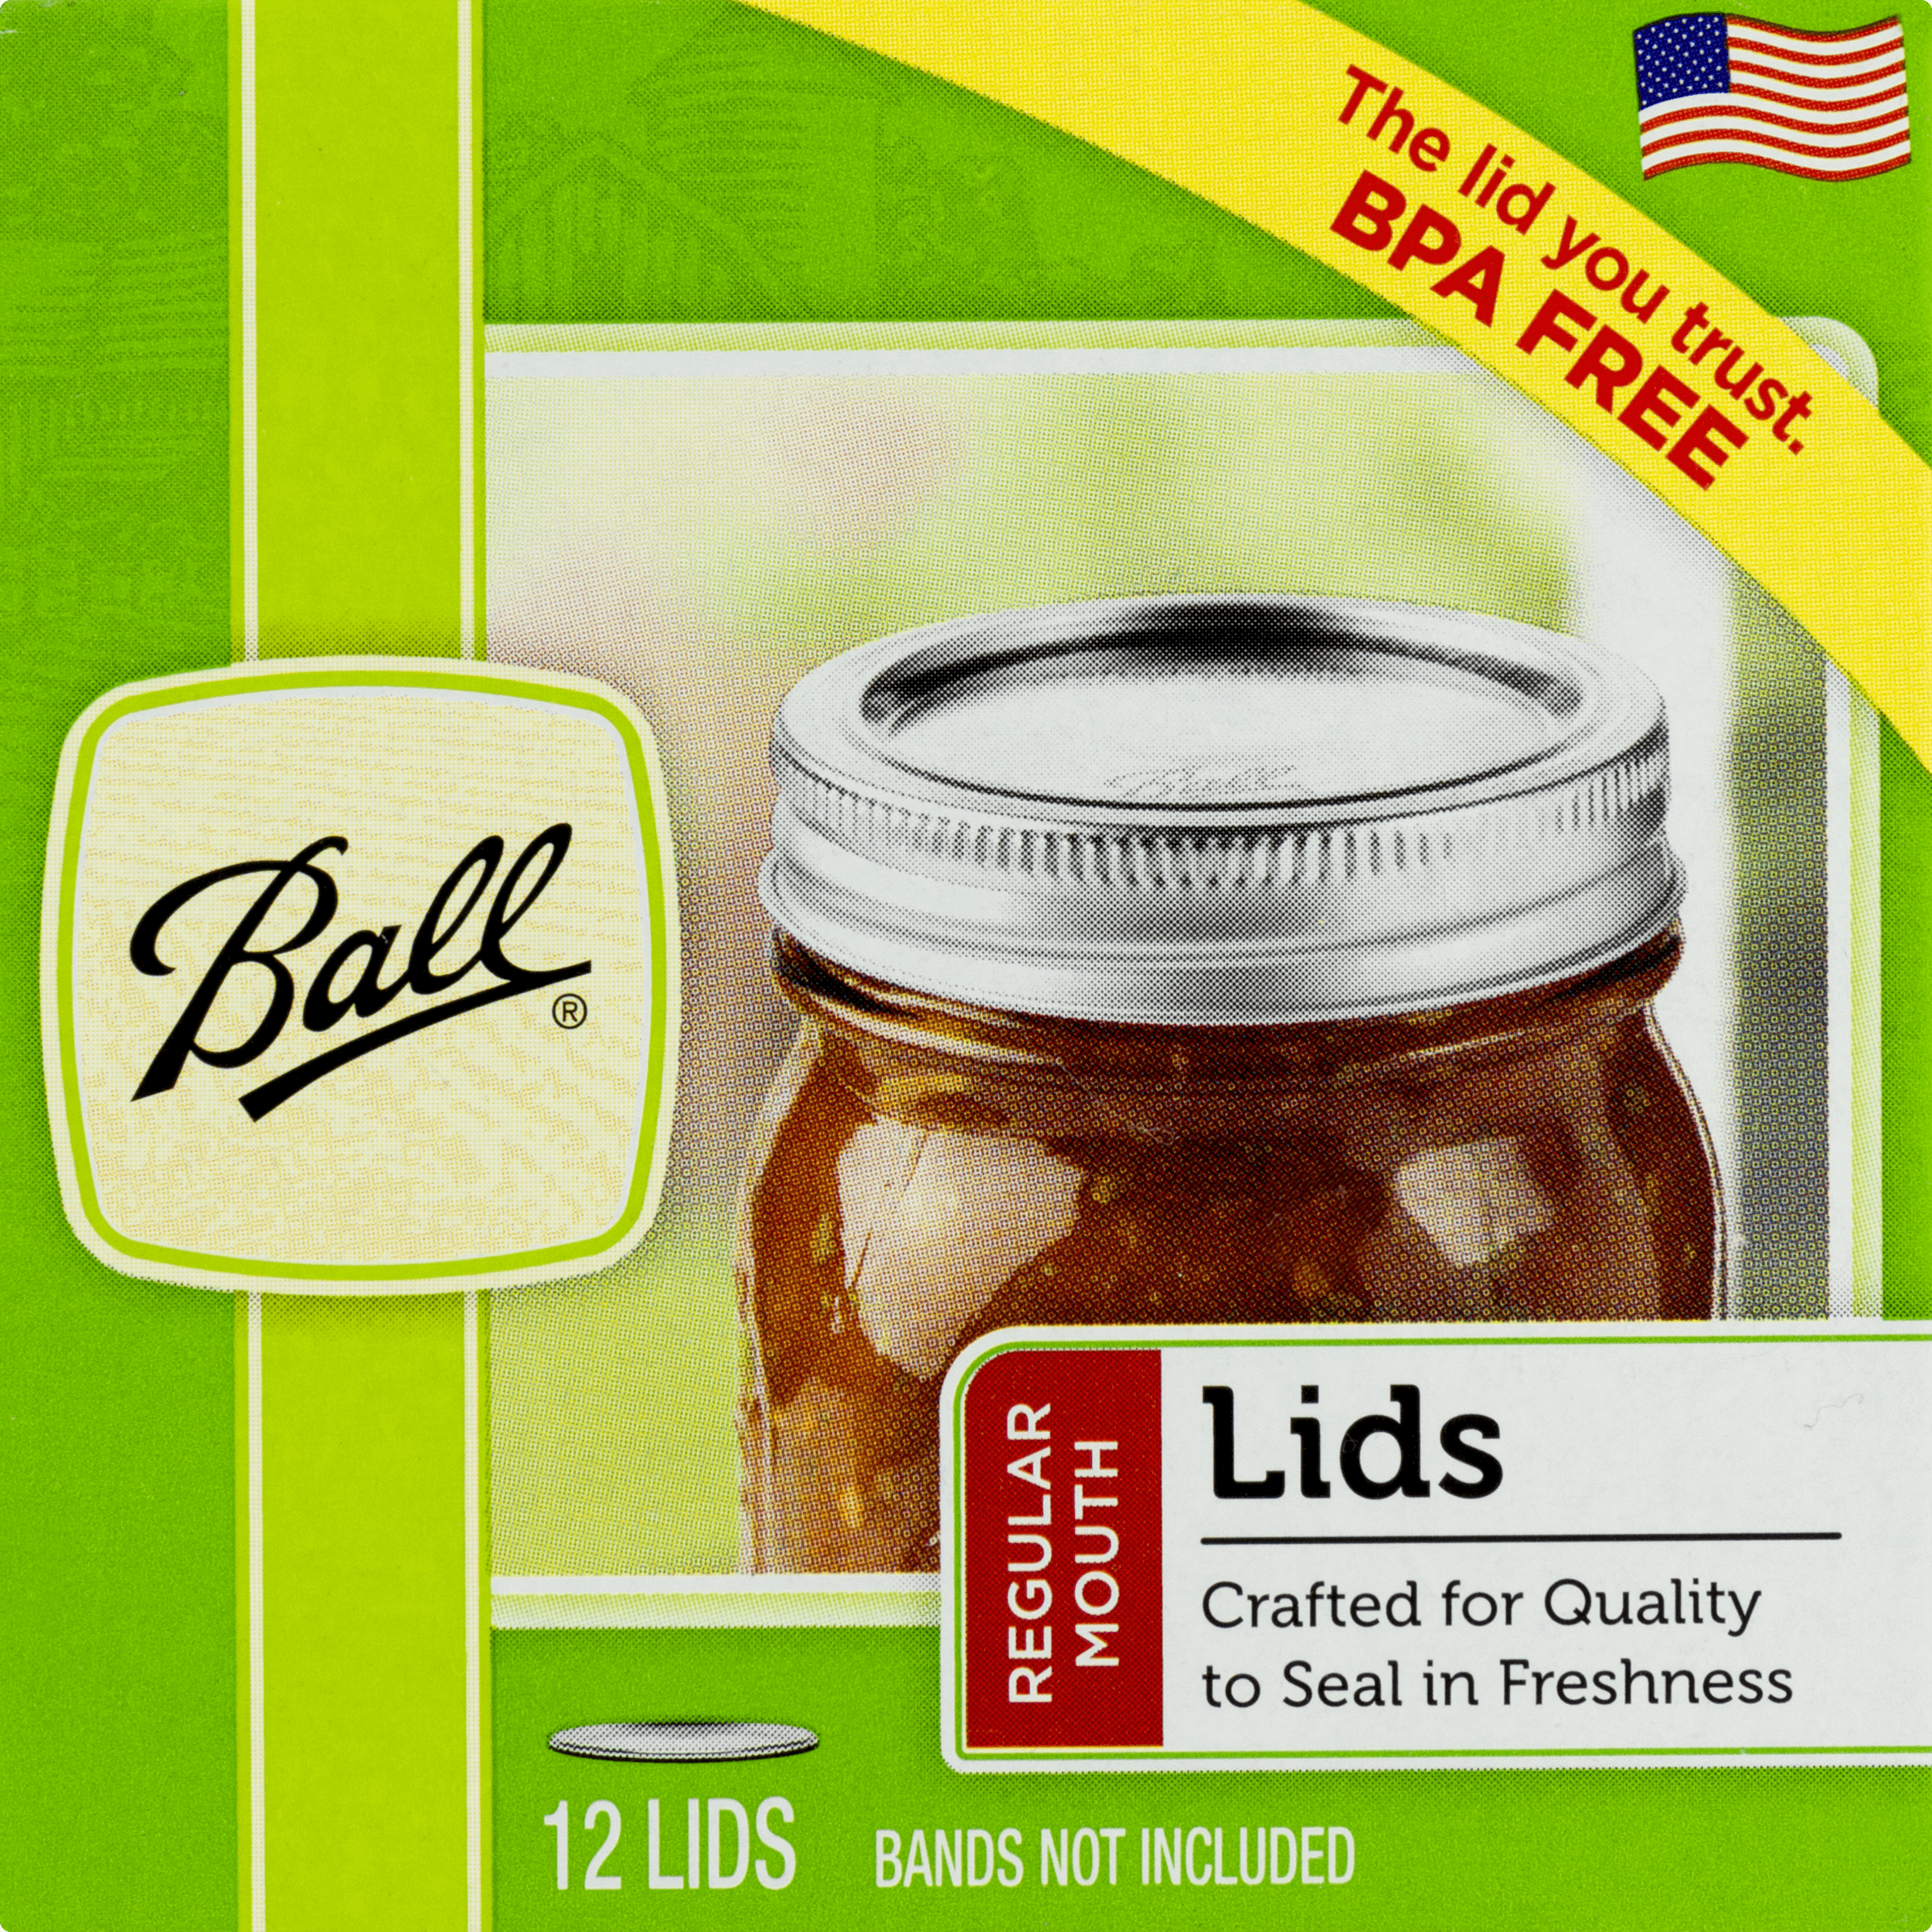 Ball Regular Mouth Lids, 12 Count - image 4 of 9